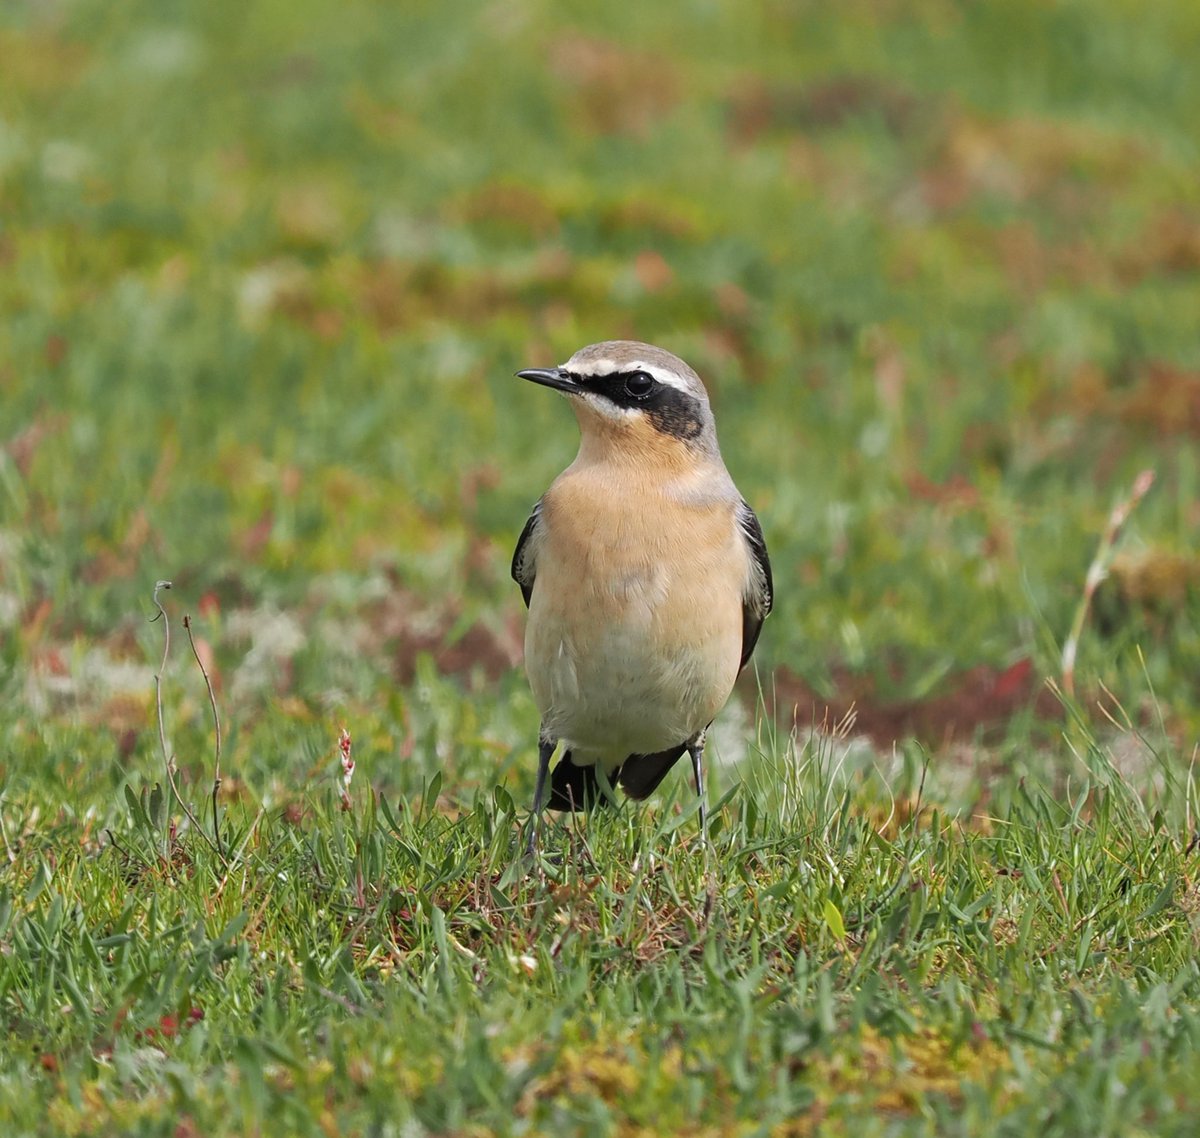 We came across this fabulous male Wheatear on Saturday in the dunes south of the sluice at @RSPBMinsmere #birds #birdphotography #wildlife #wildlifephotography #nature #NaturePhotography @Natures_Voice @suffolkwildlife @BtoSuffolk @NatureUK @Britnatureguide @BBCSpringwatch